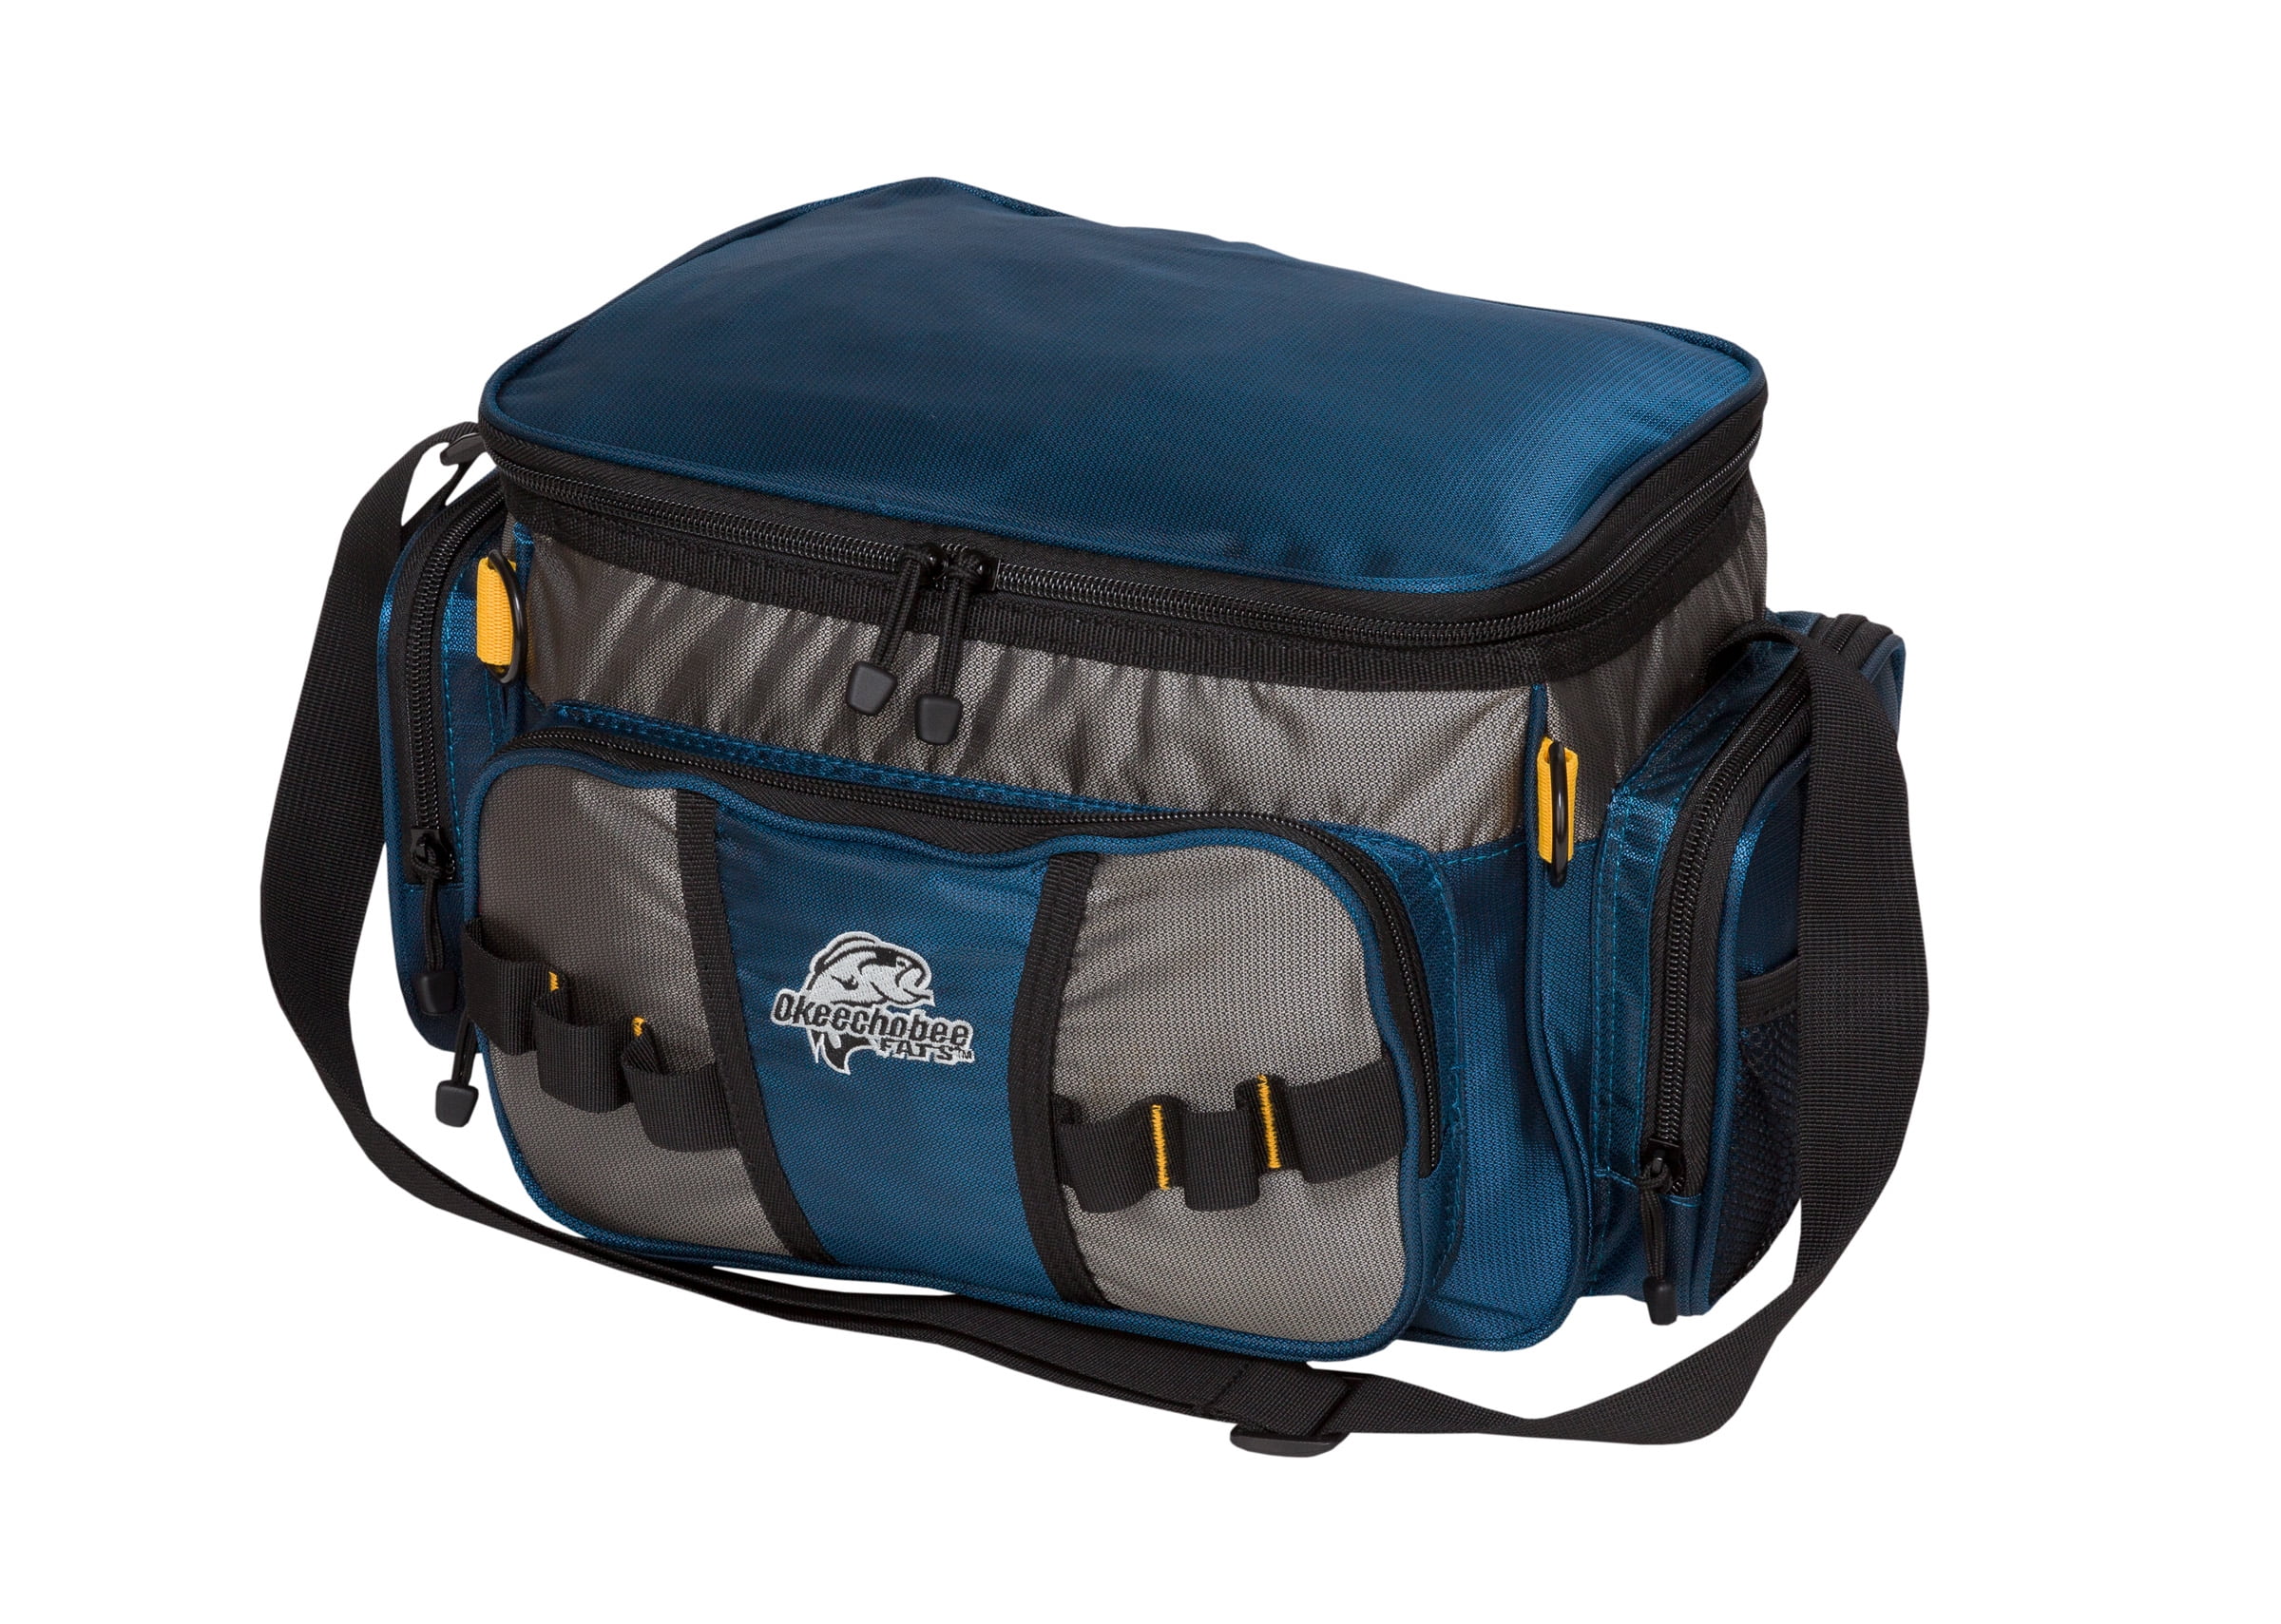 Okeechobee Fats Small Soft-Sided Fishing Tackle Bag with 2 Medium Utility  Lure Boxes, Blue Polyester